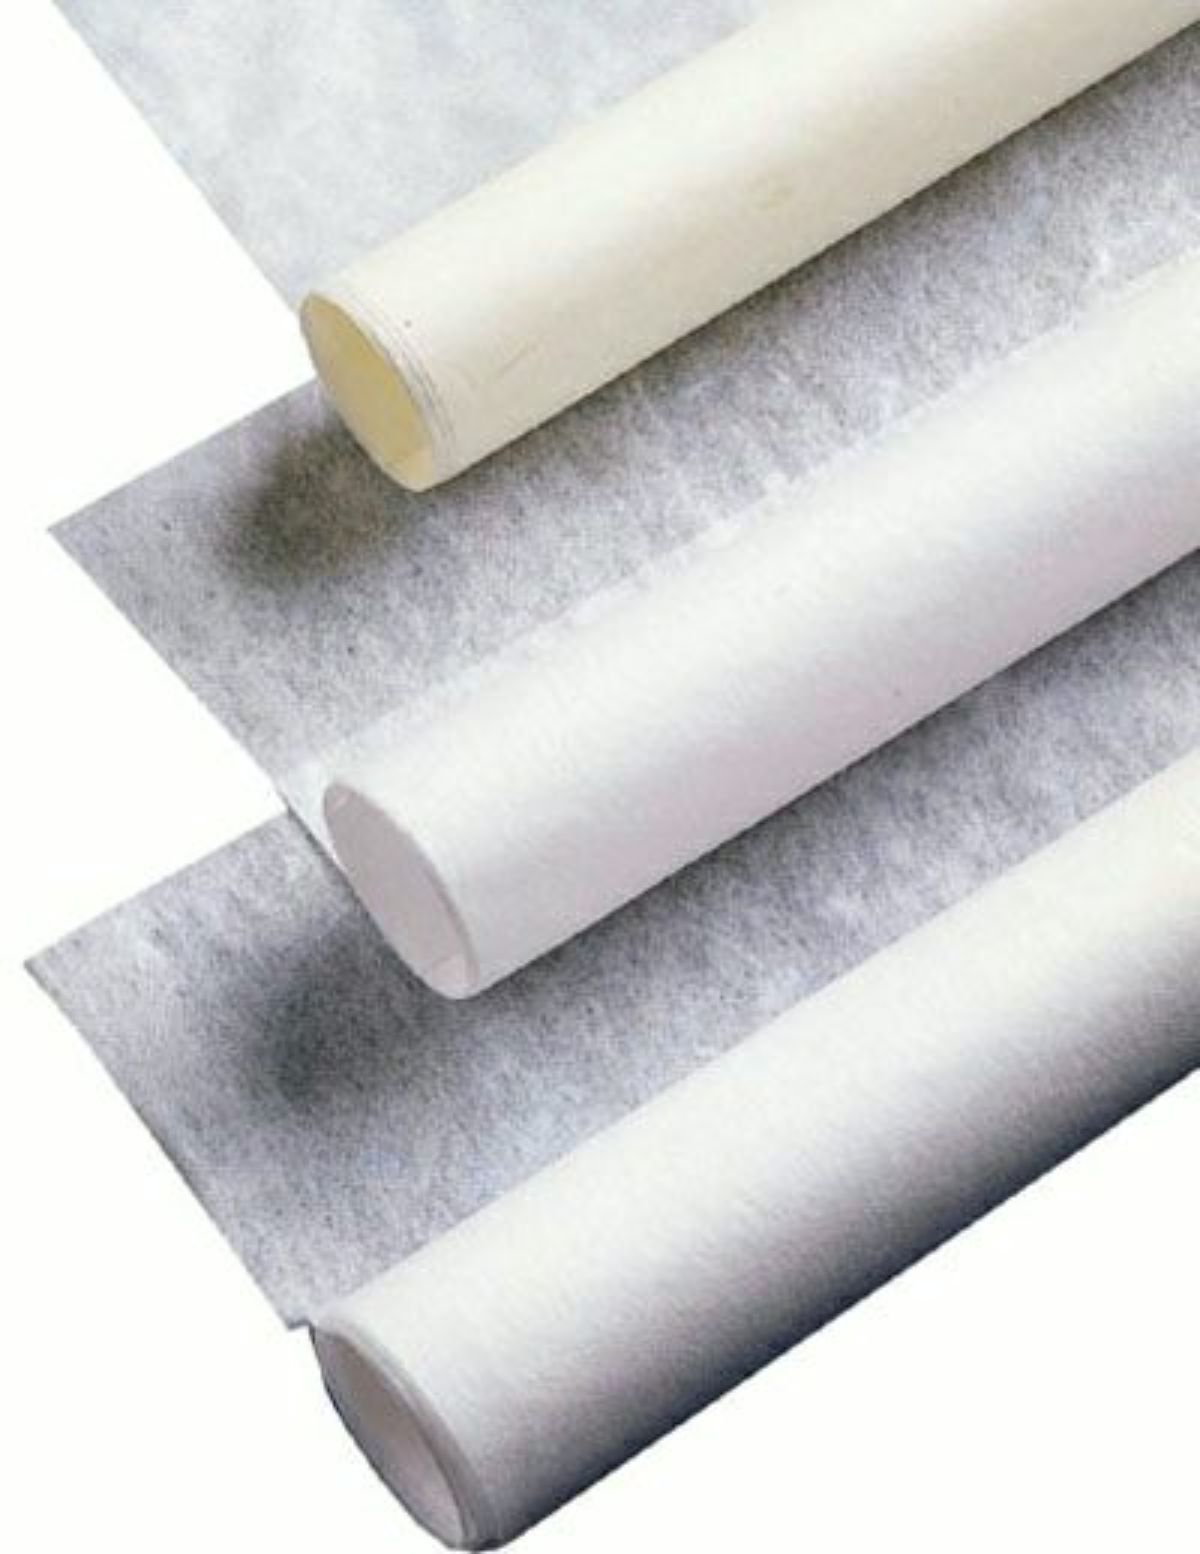 Greaseproof paper - Wikipedia